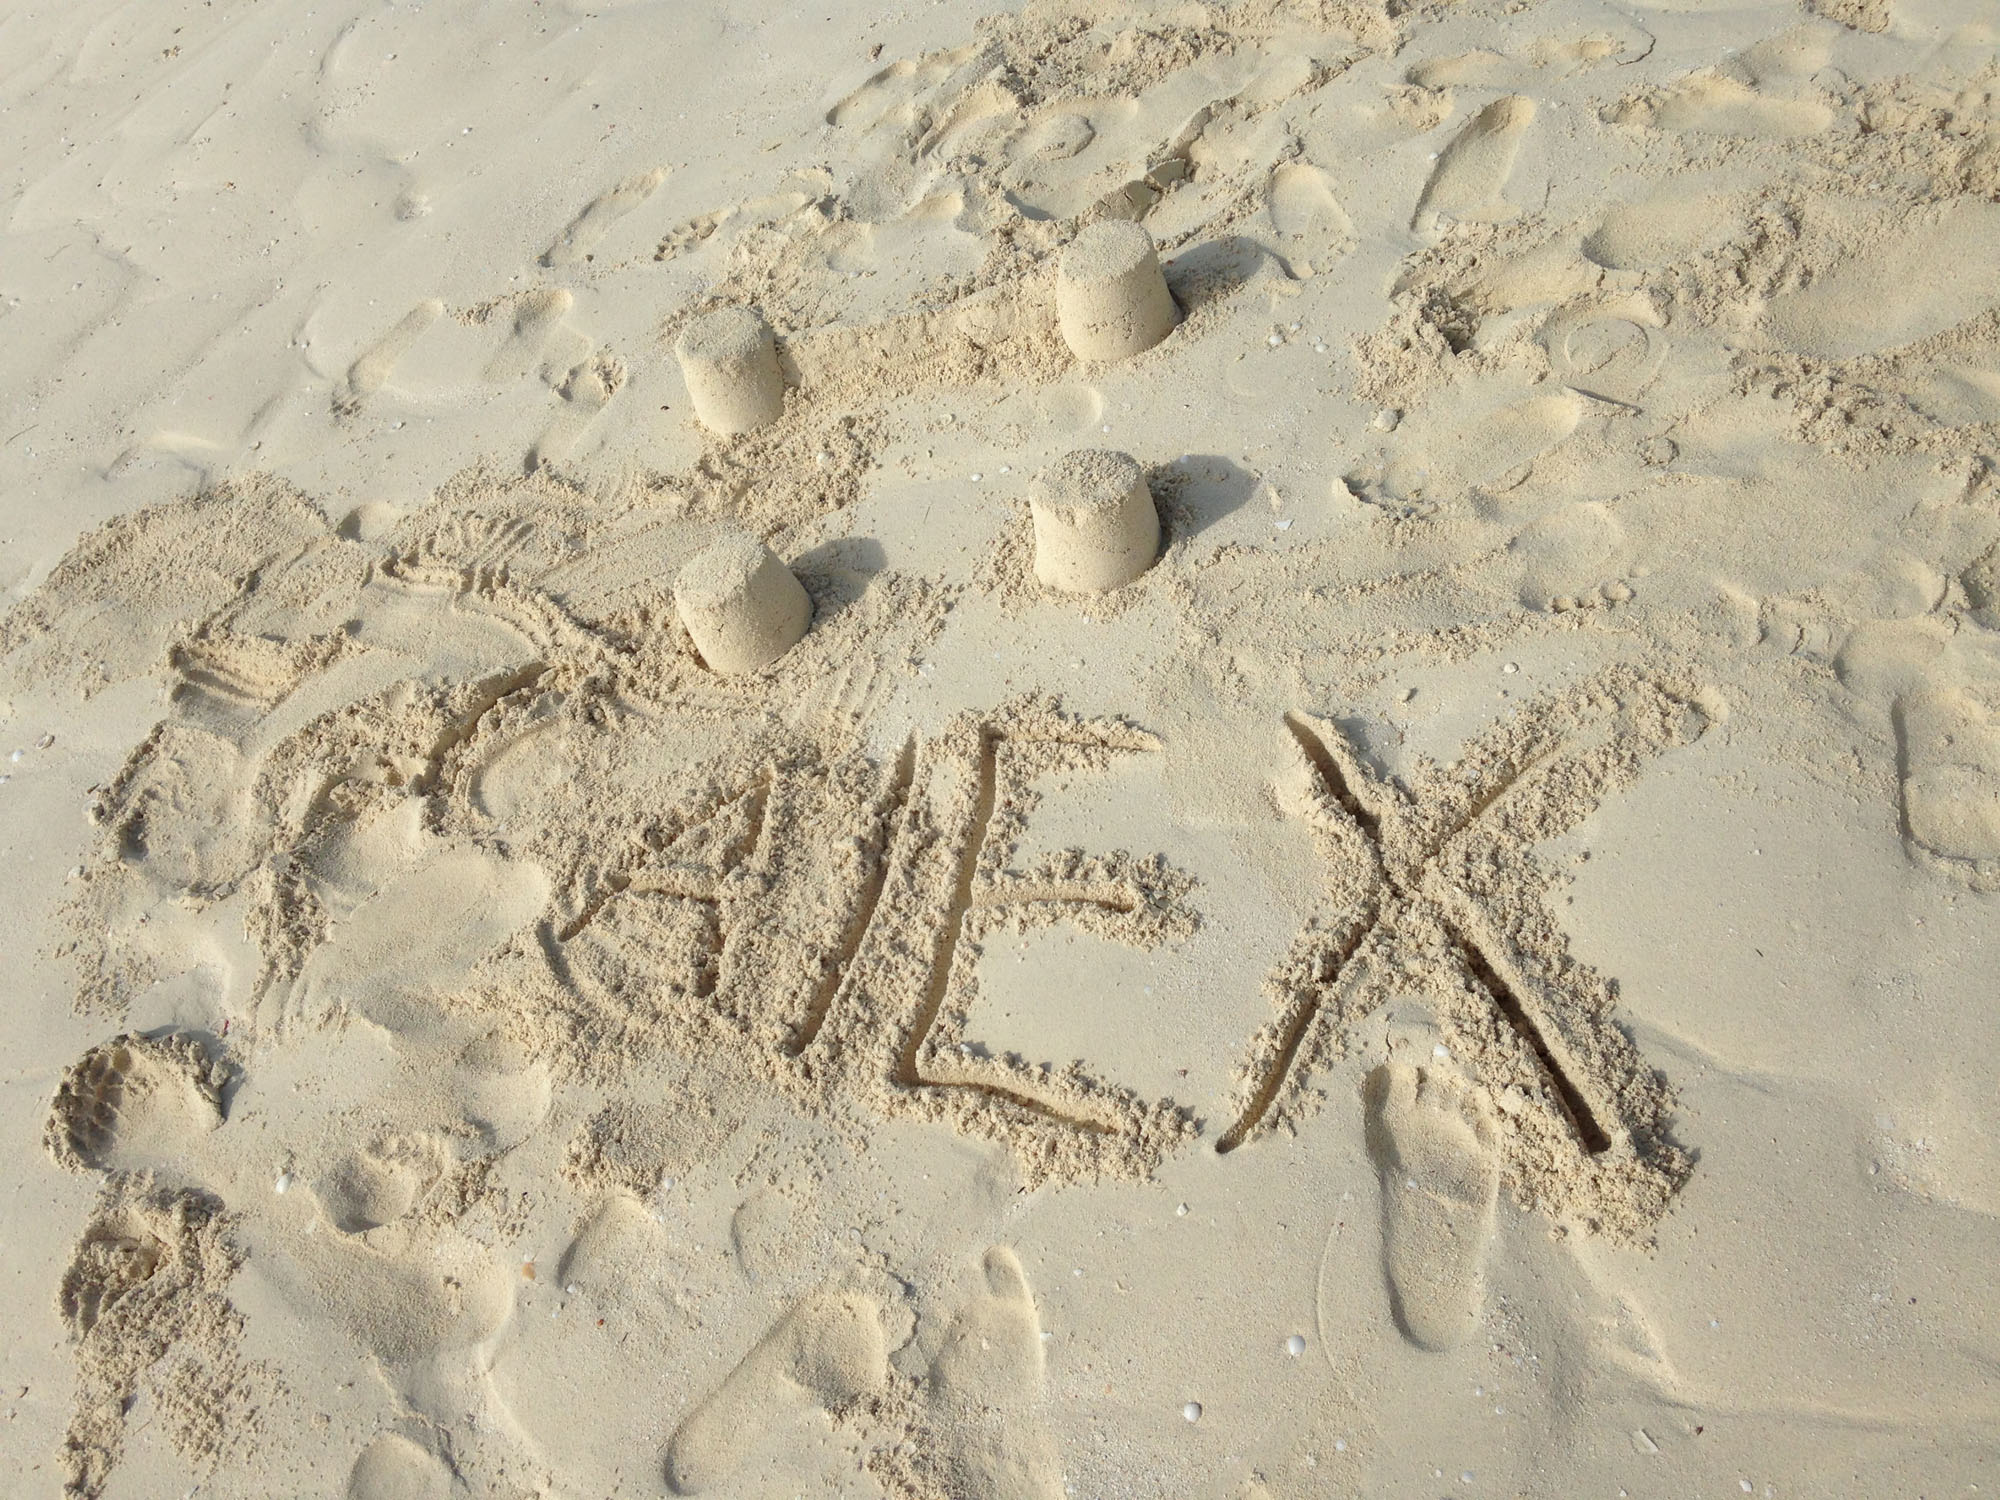 Alex Was Here! - Castaway Cay